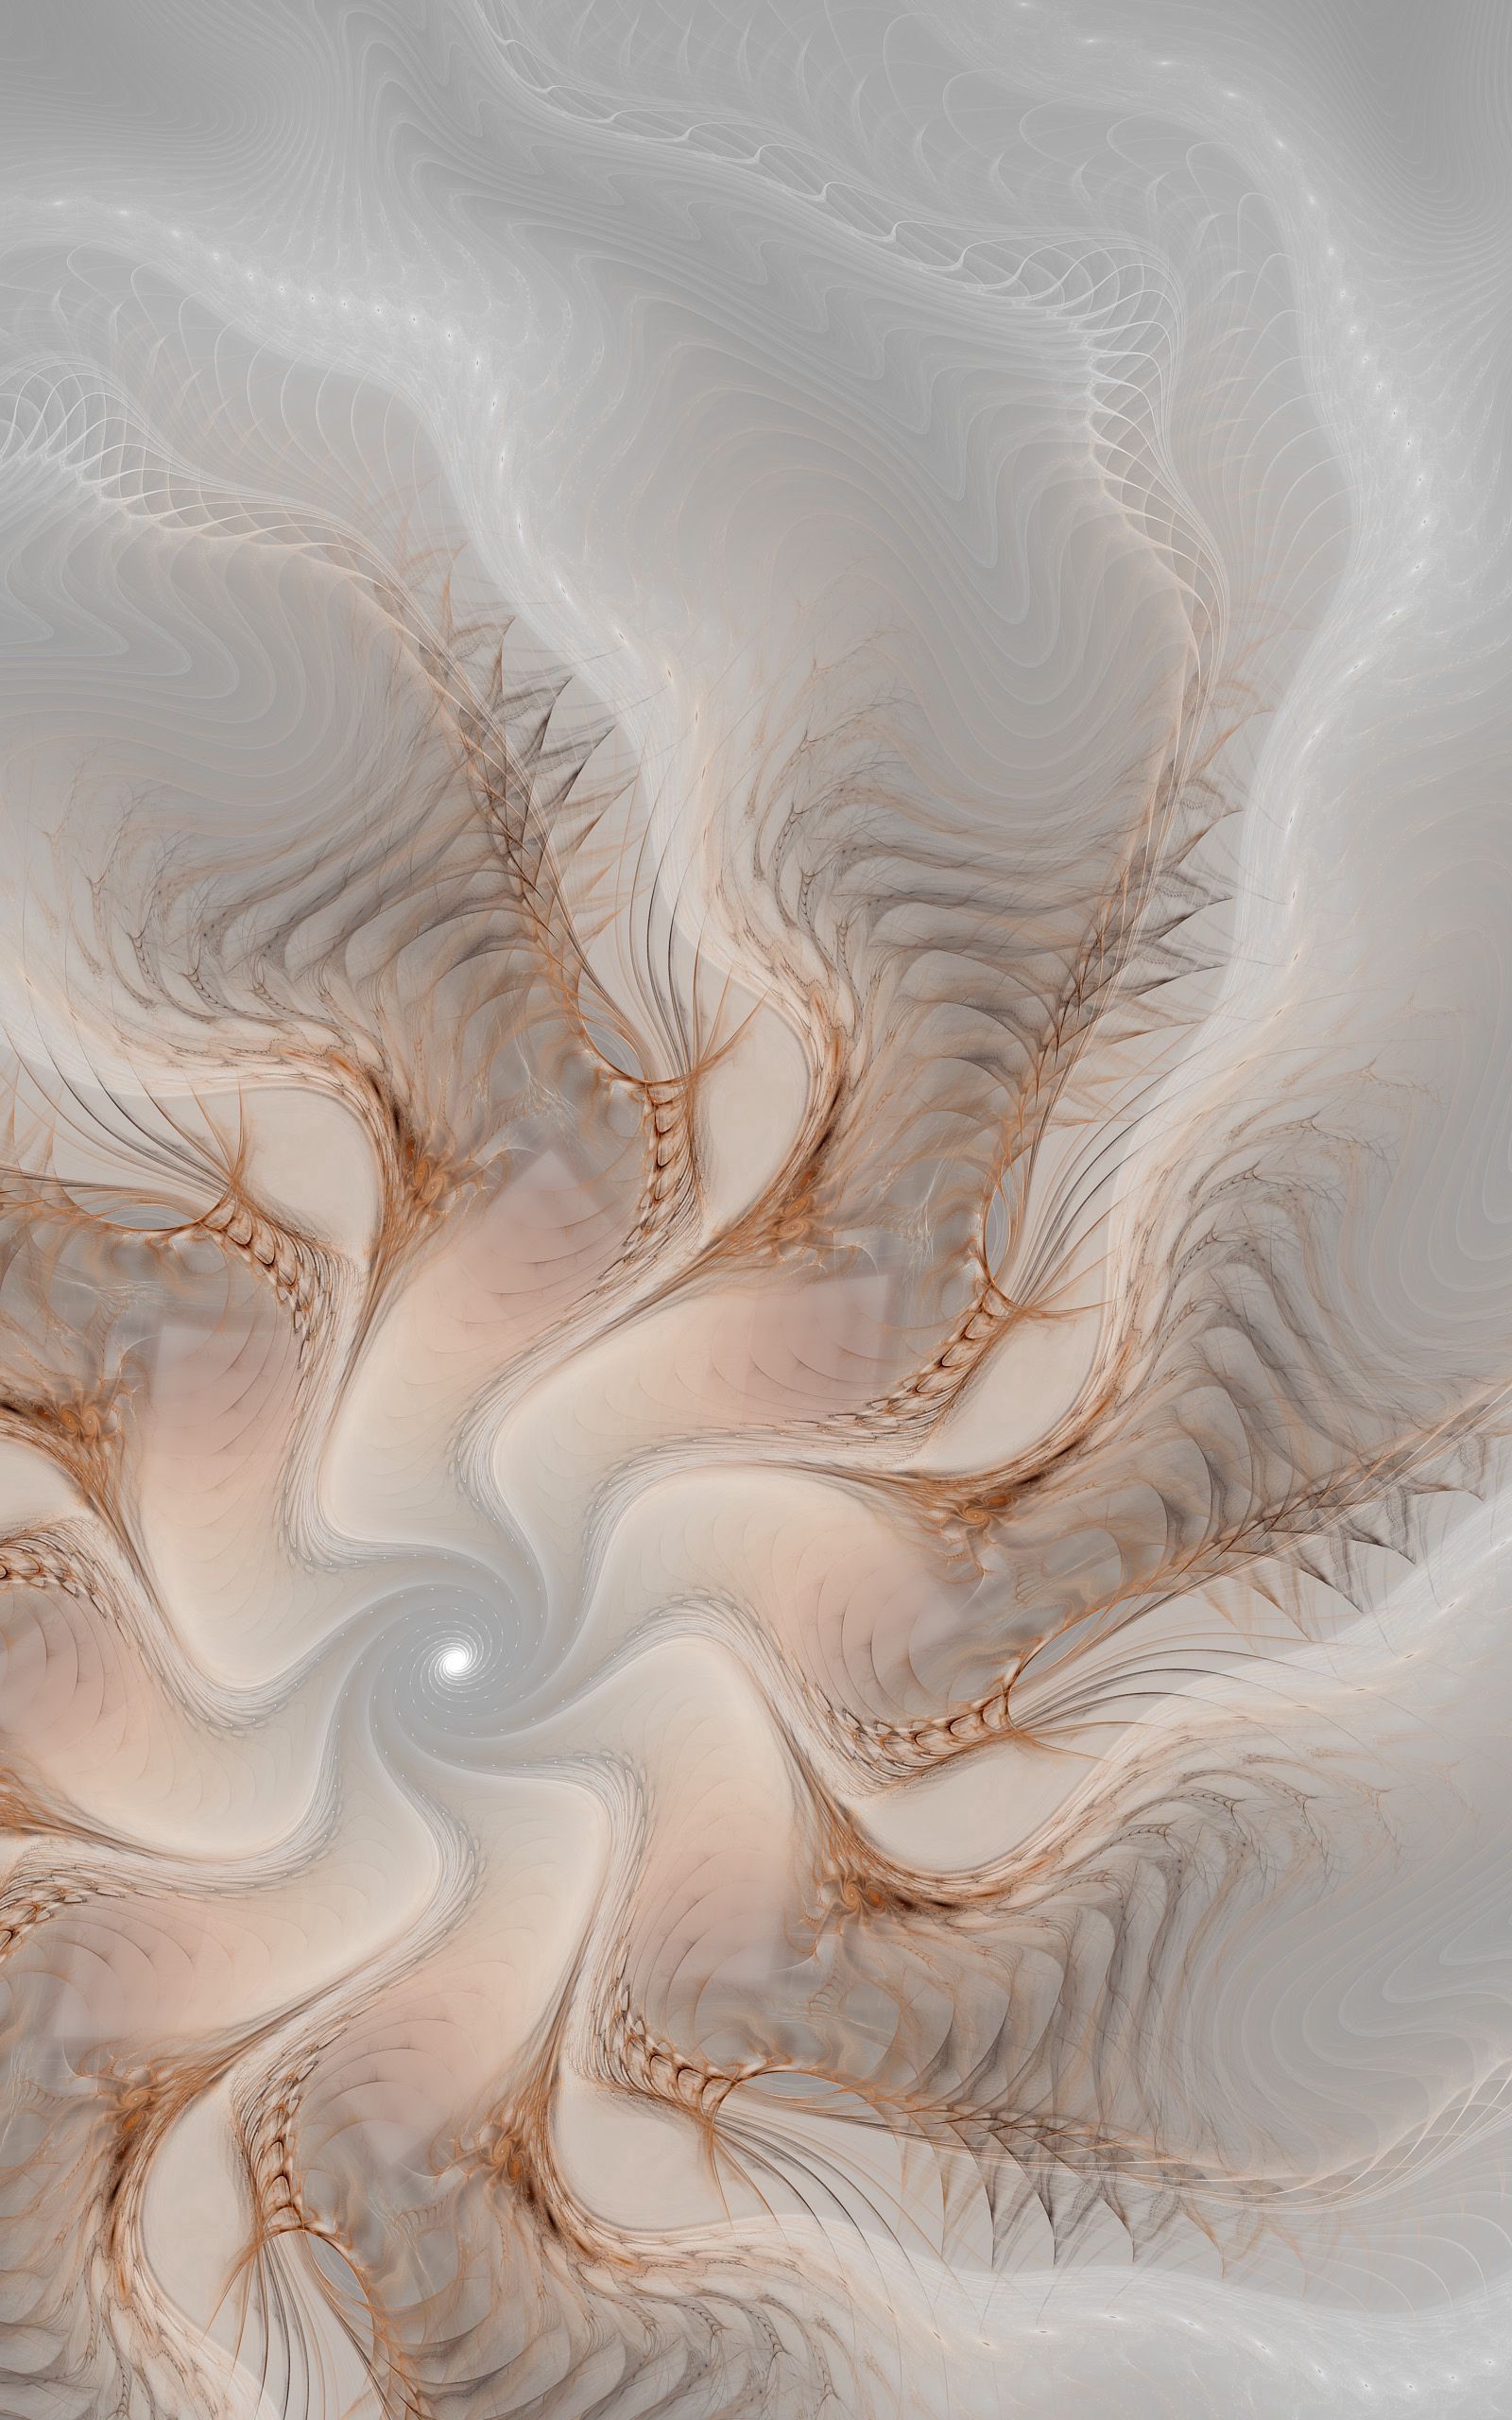 abstract, patterns, fractal, rotation, swirling, involute Full HD